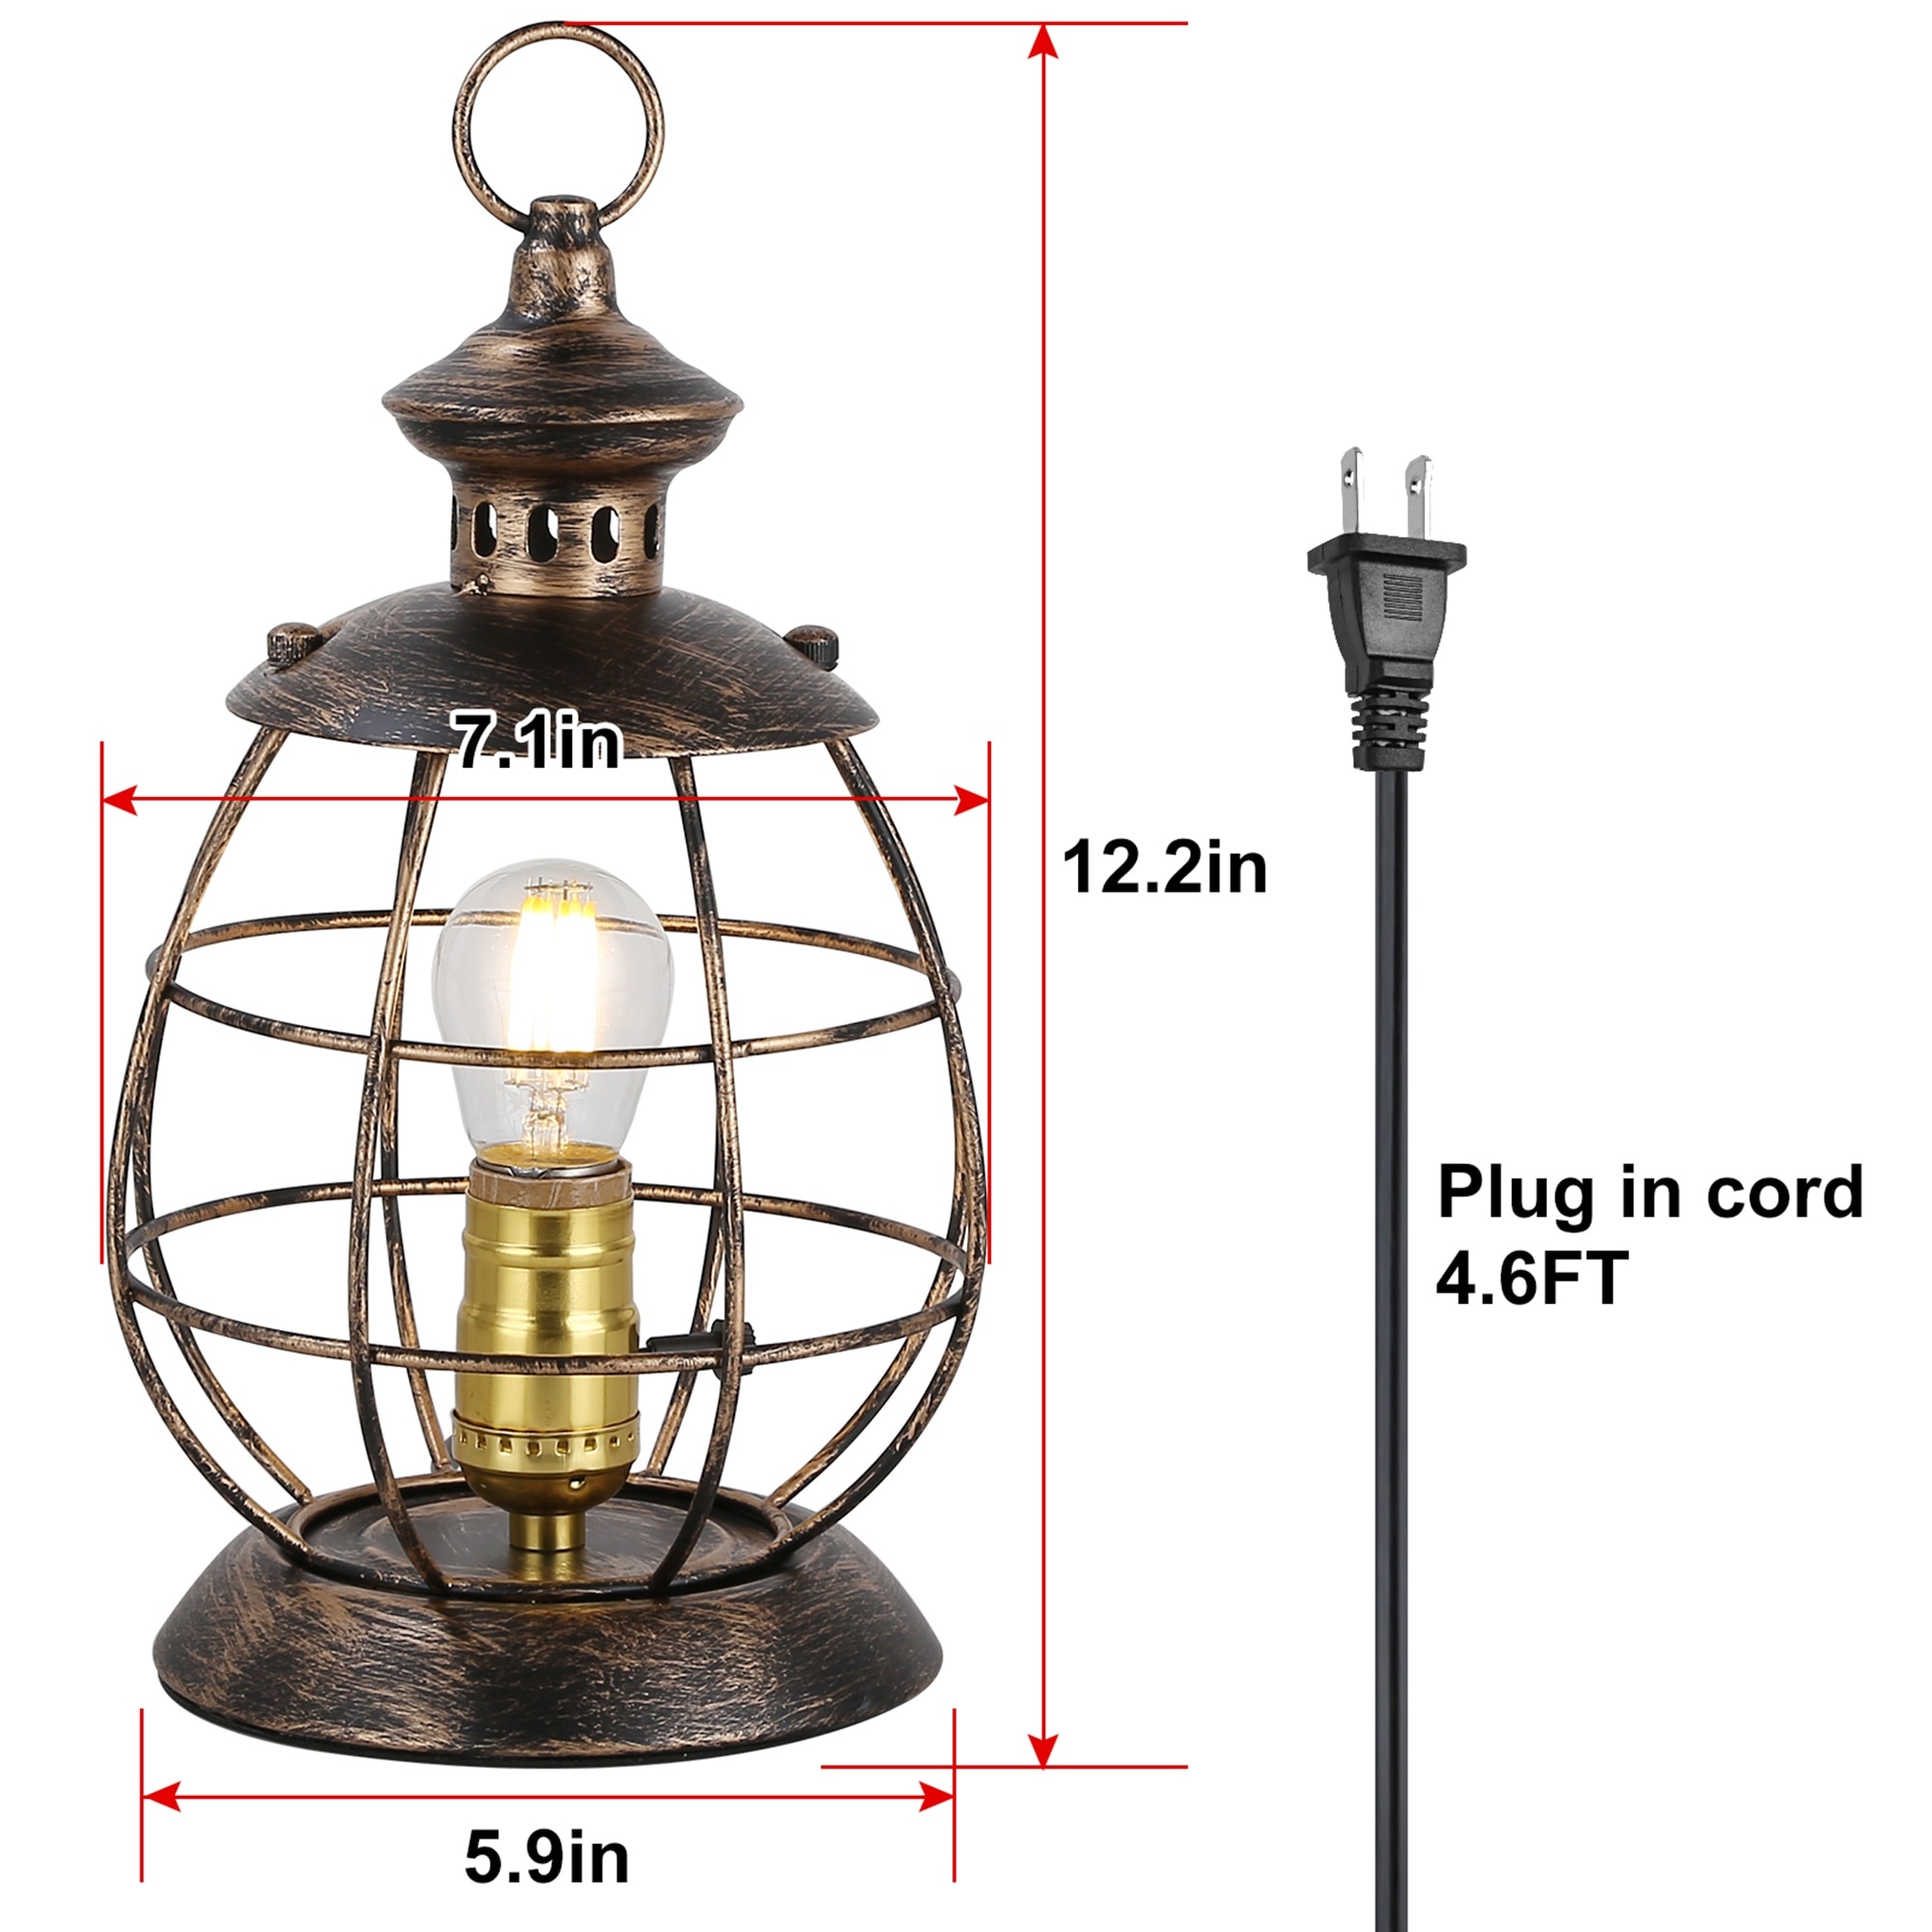 https://ak1.ostkcdn.com/images/products/is/images/direct/591fee98a7ae97d0840c6871fc6490c39983fd42/Antique-Industrial-Modern-Electric-Lantern-Table-Lamp-for-Bedroom-Bedside%2C-Metal-Cage-Shade-Reading-Desk-Lamp-for-Living-Room.jpg